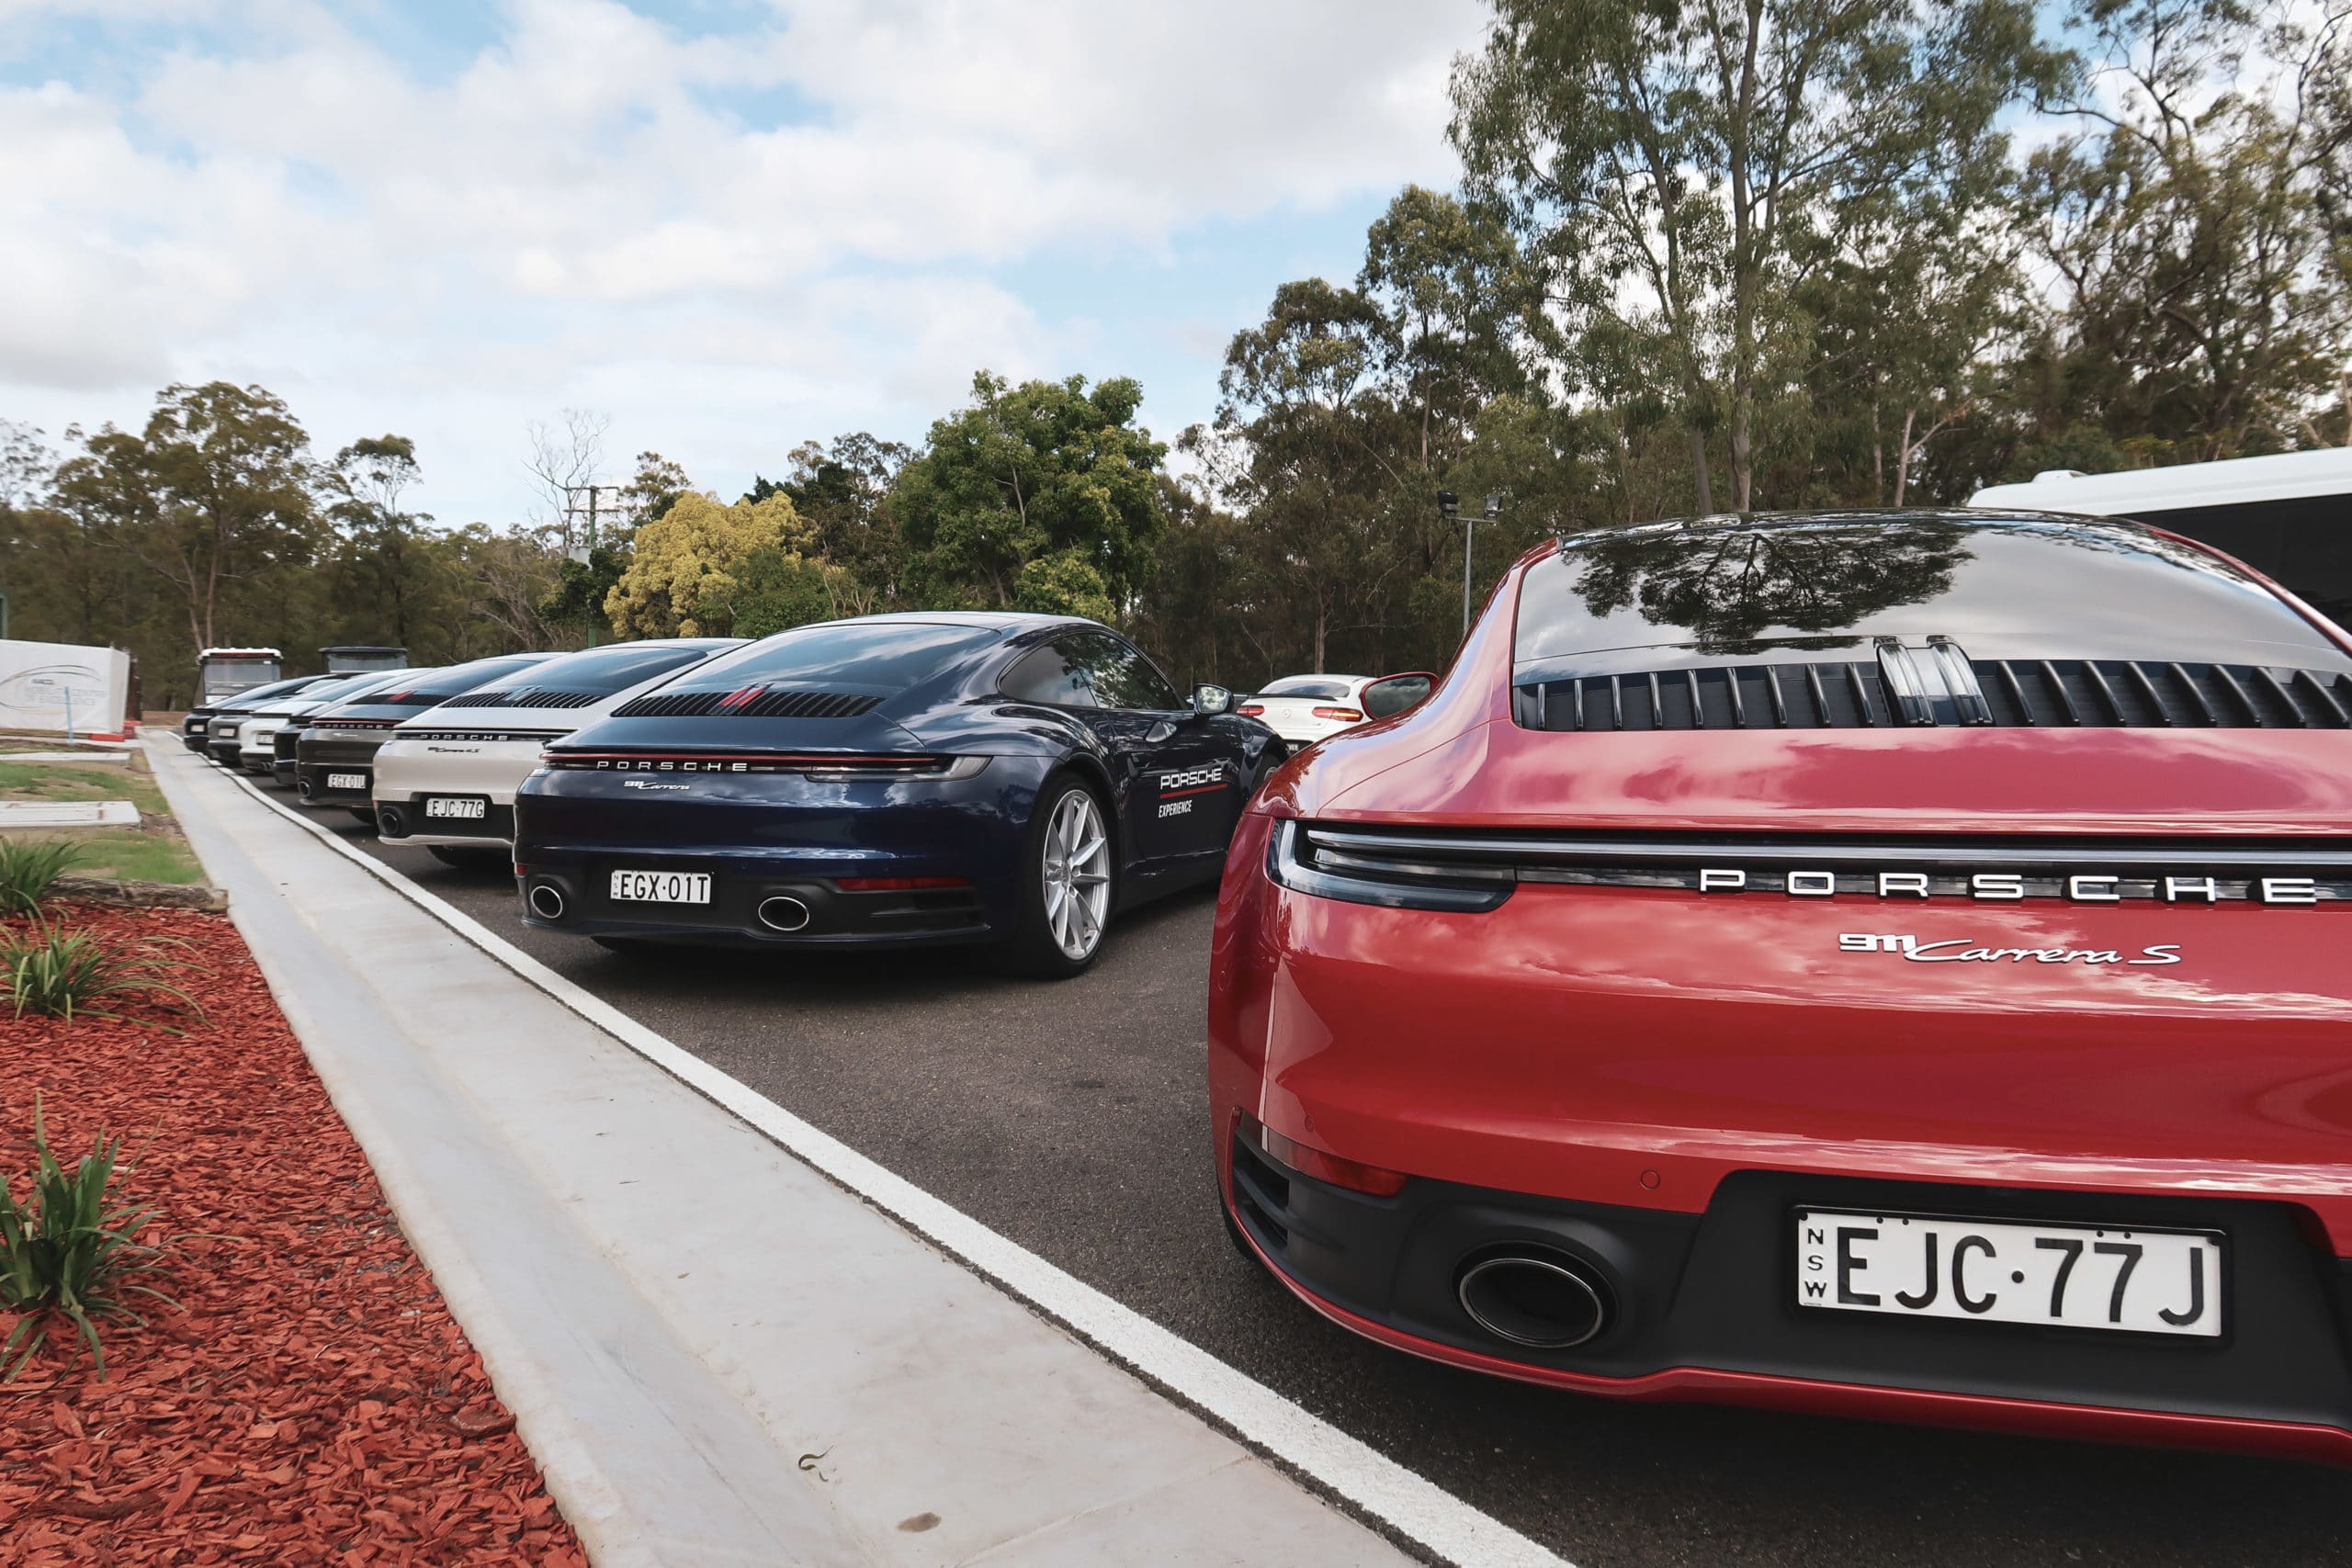 REVIEW: The Porsche Track Experience Is A Day Of Full Throttle Fun